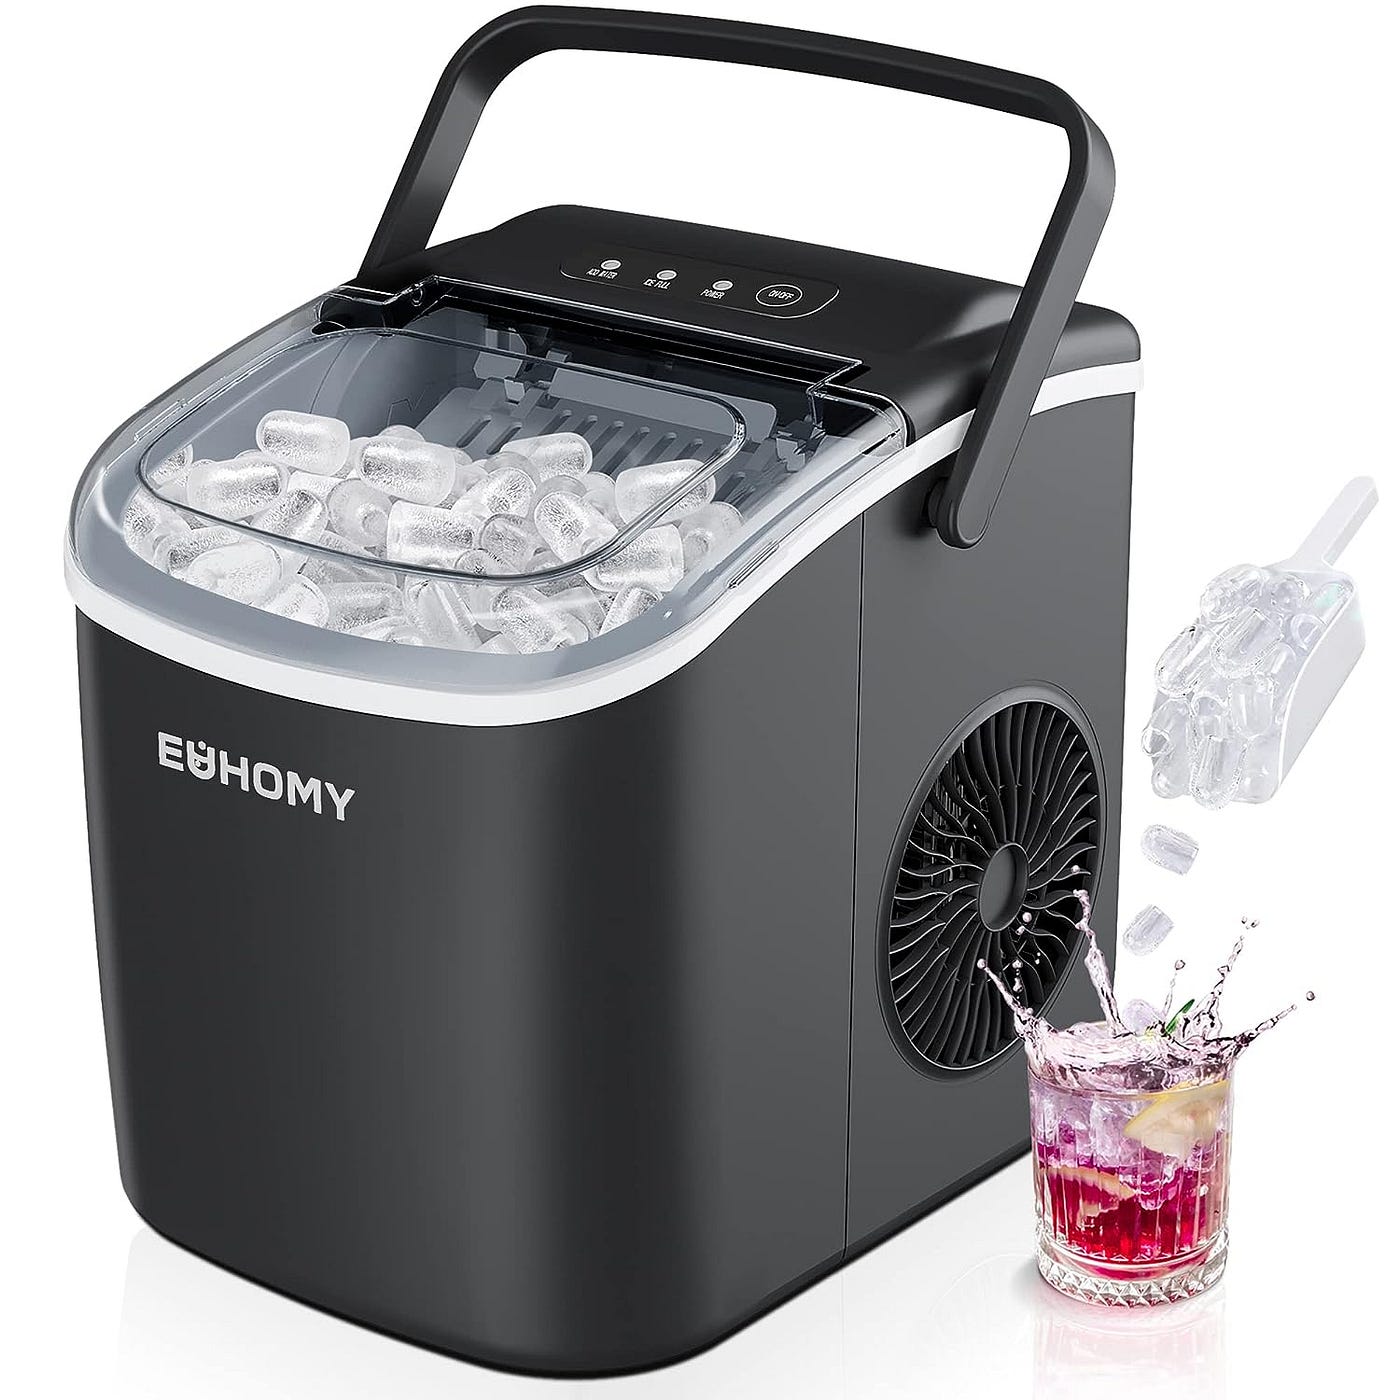 Silonn Countertop Ice Maker Machine with Handle, Portable, Makes up to 27  lbs. of Ice Per Day, 9 Cubes in 7 Mins, Self-Cleaning with Ice Scoop and